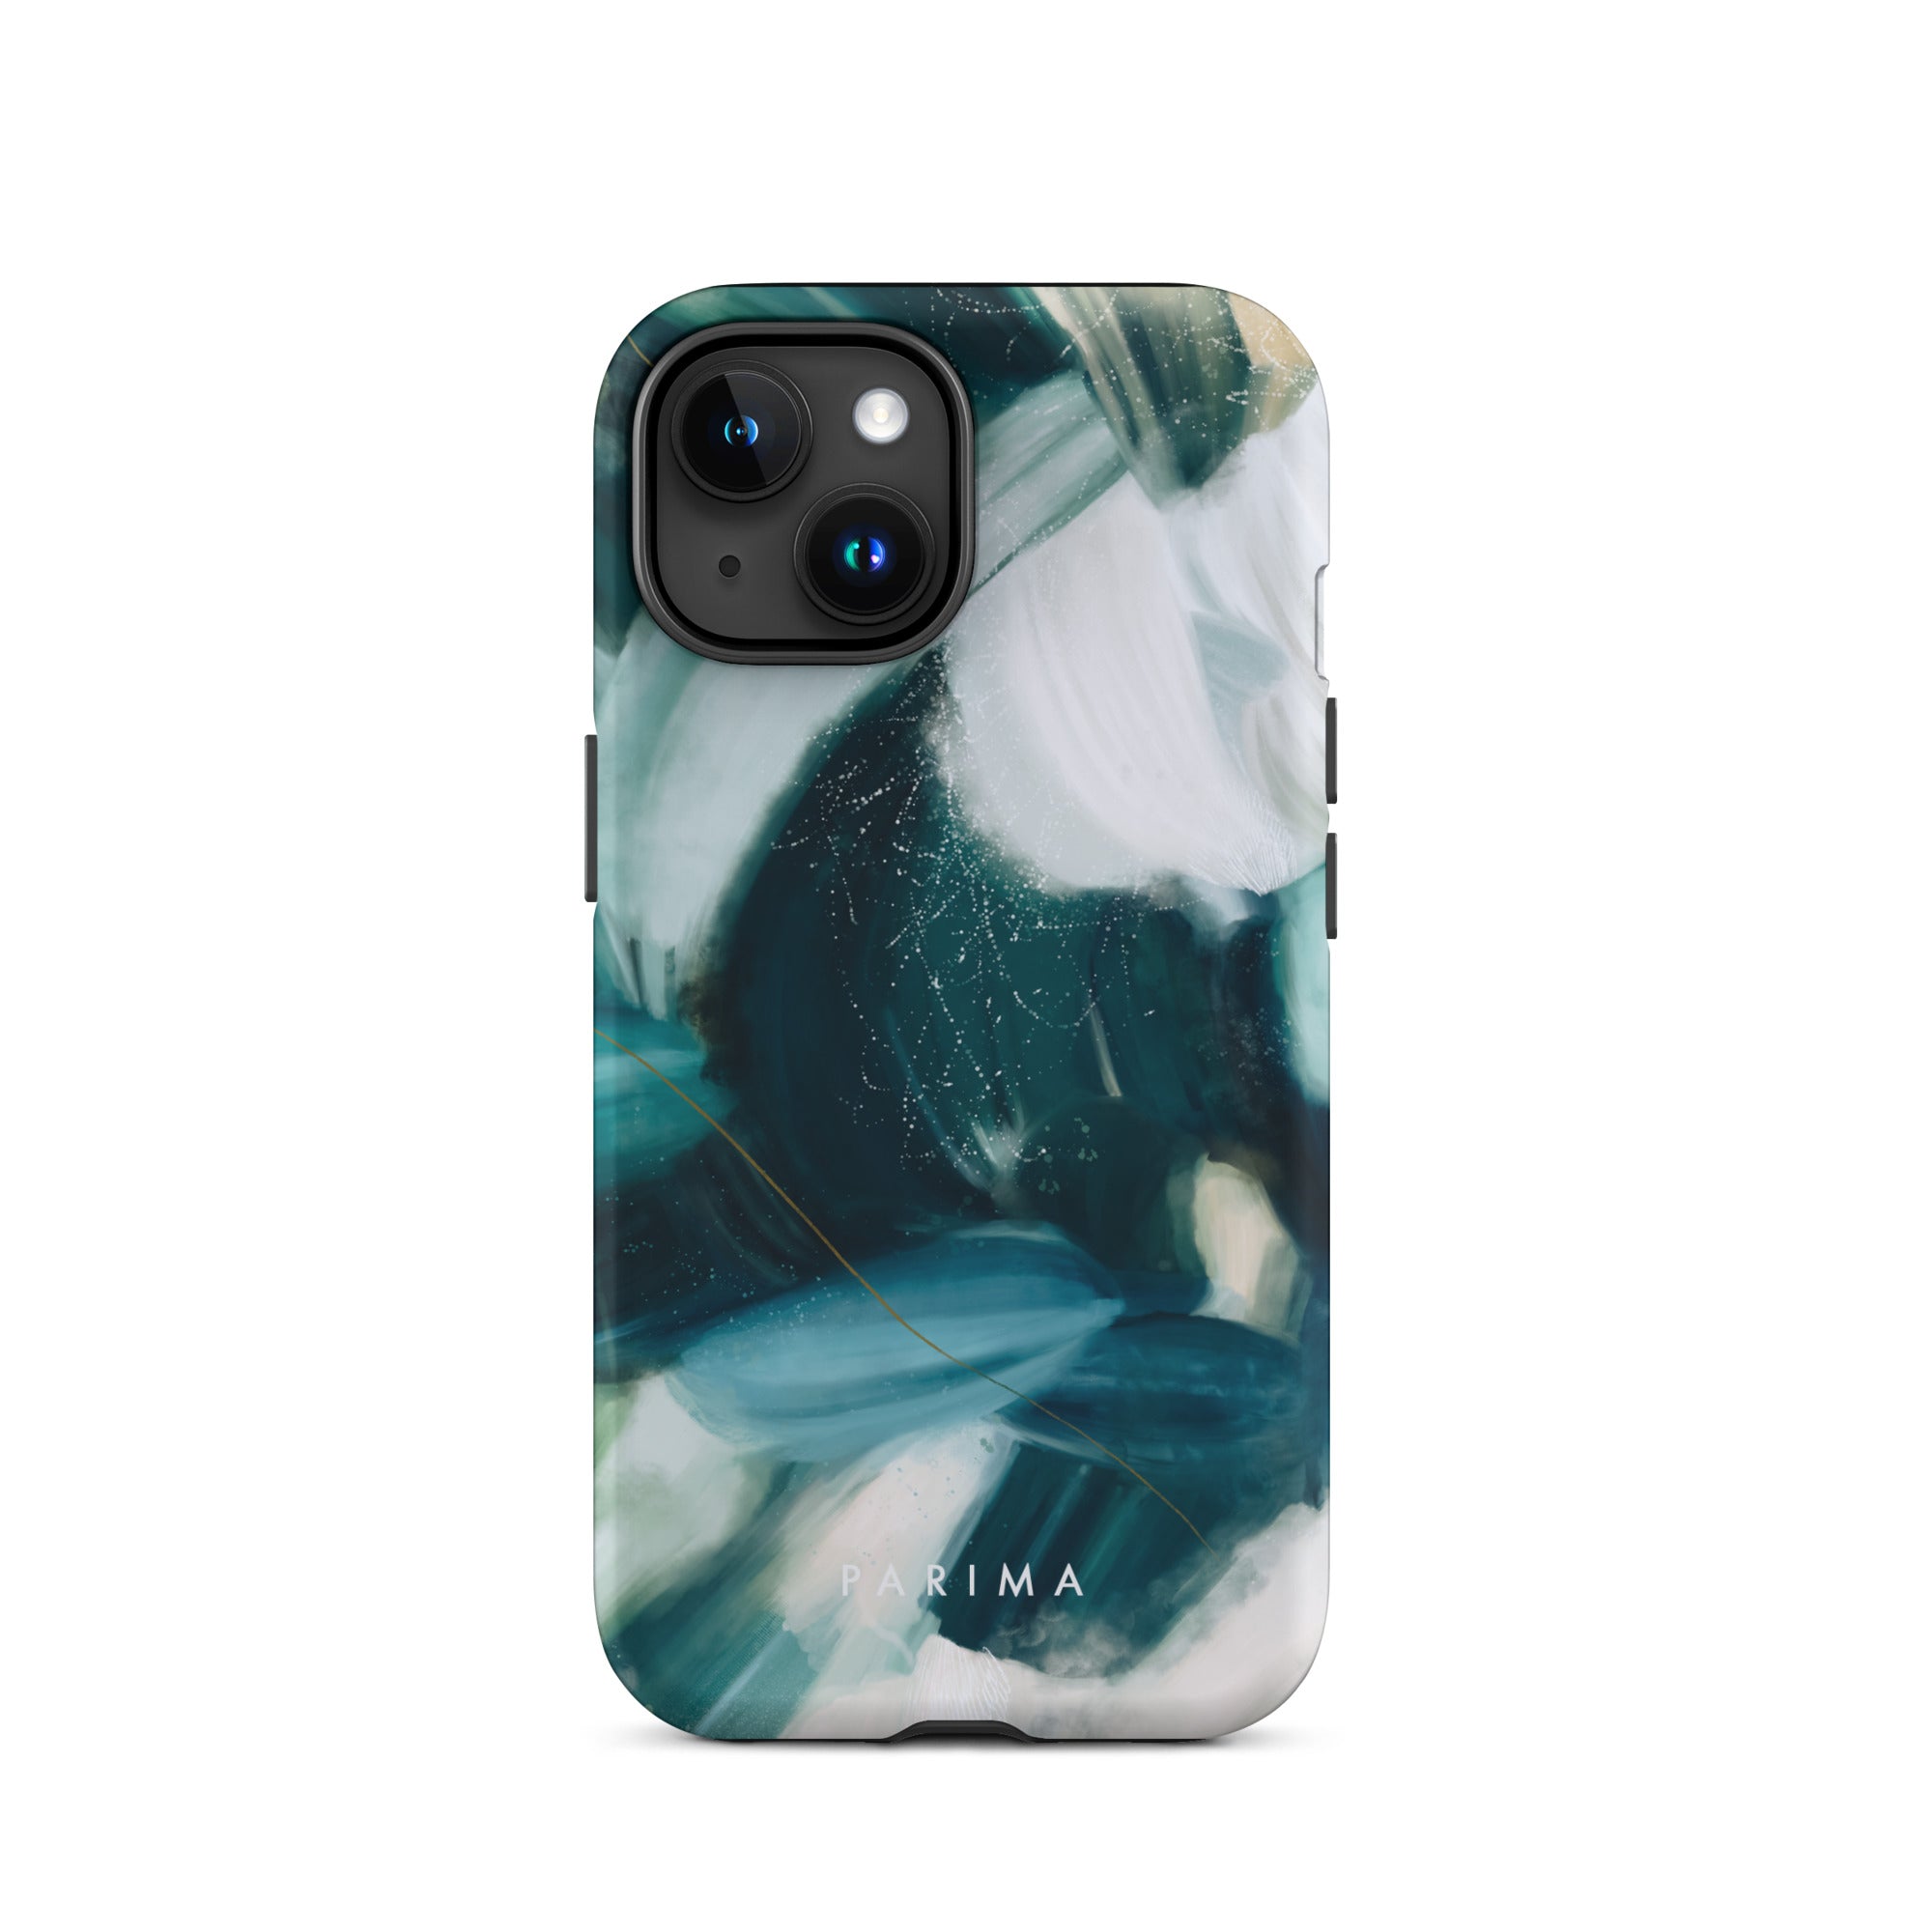 Caspian, green and blue abstract art - iPhone 15 tough case by Parima Studio